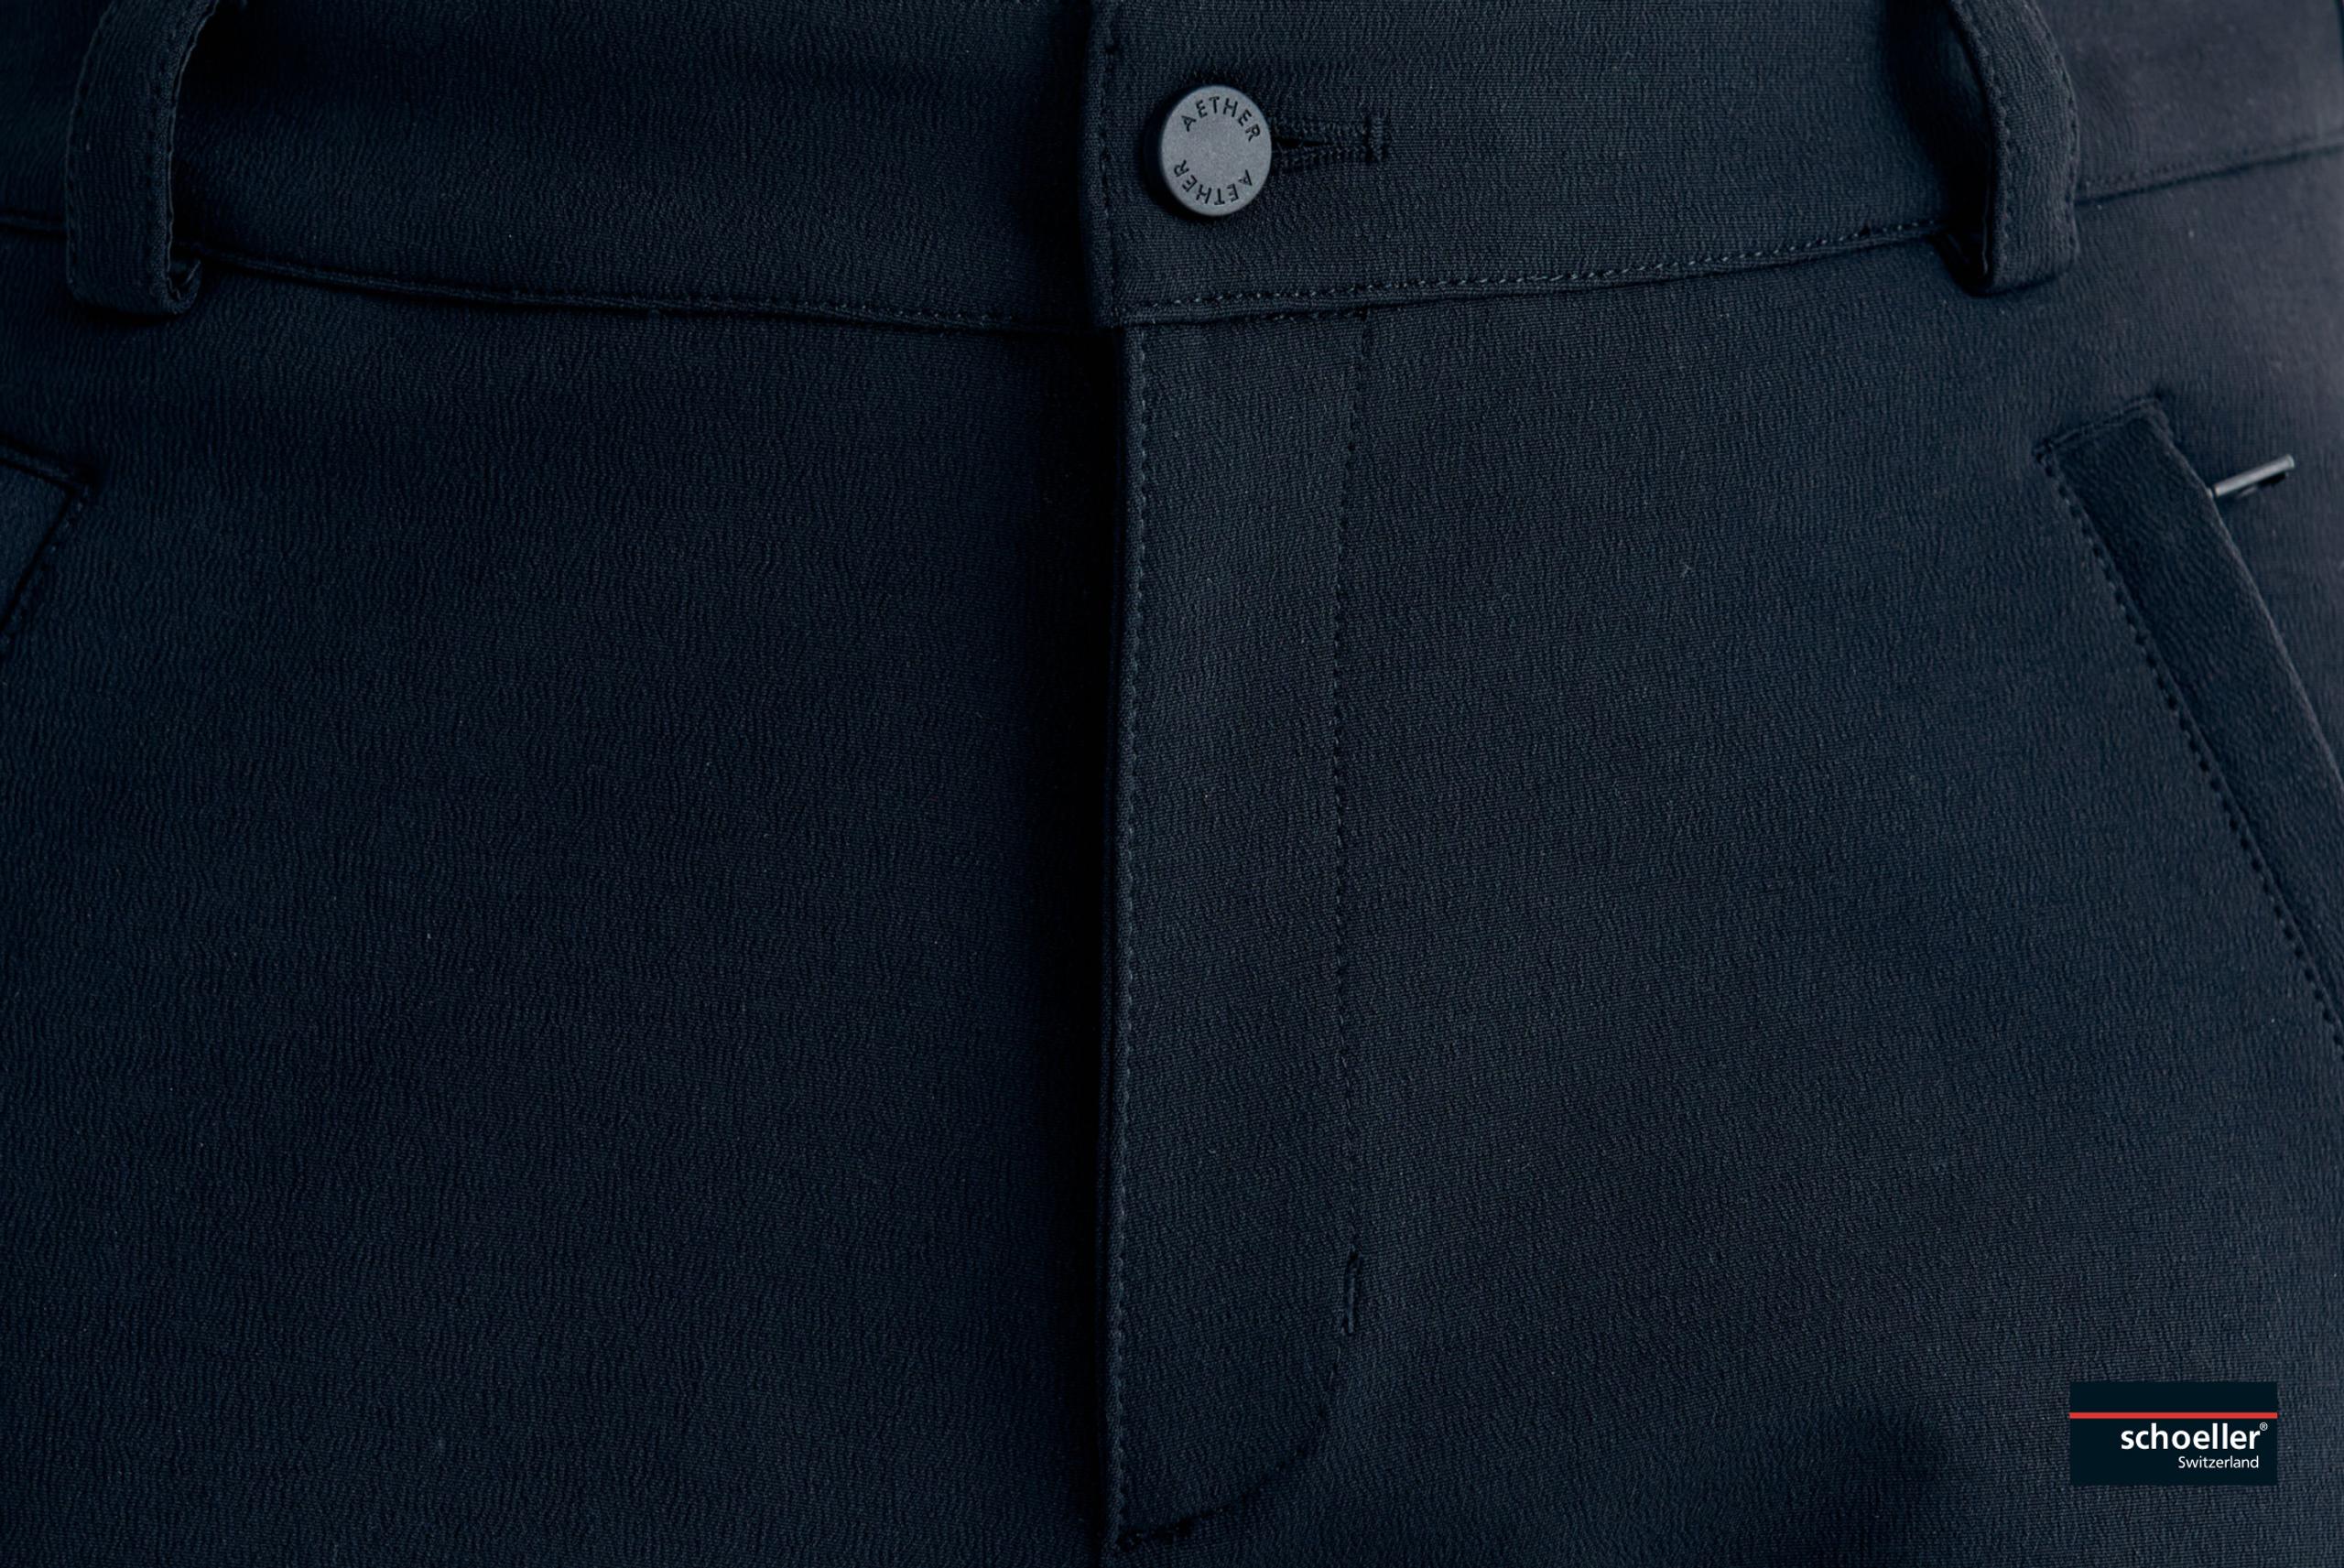 Closeup view of Schoeller® fabric pant